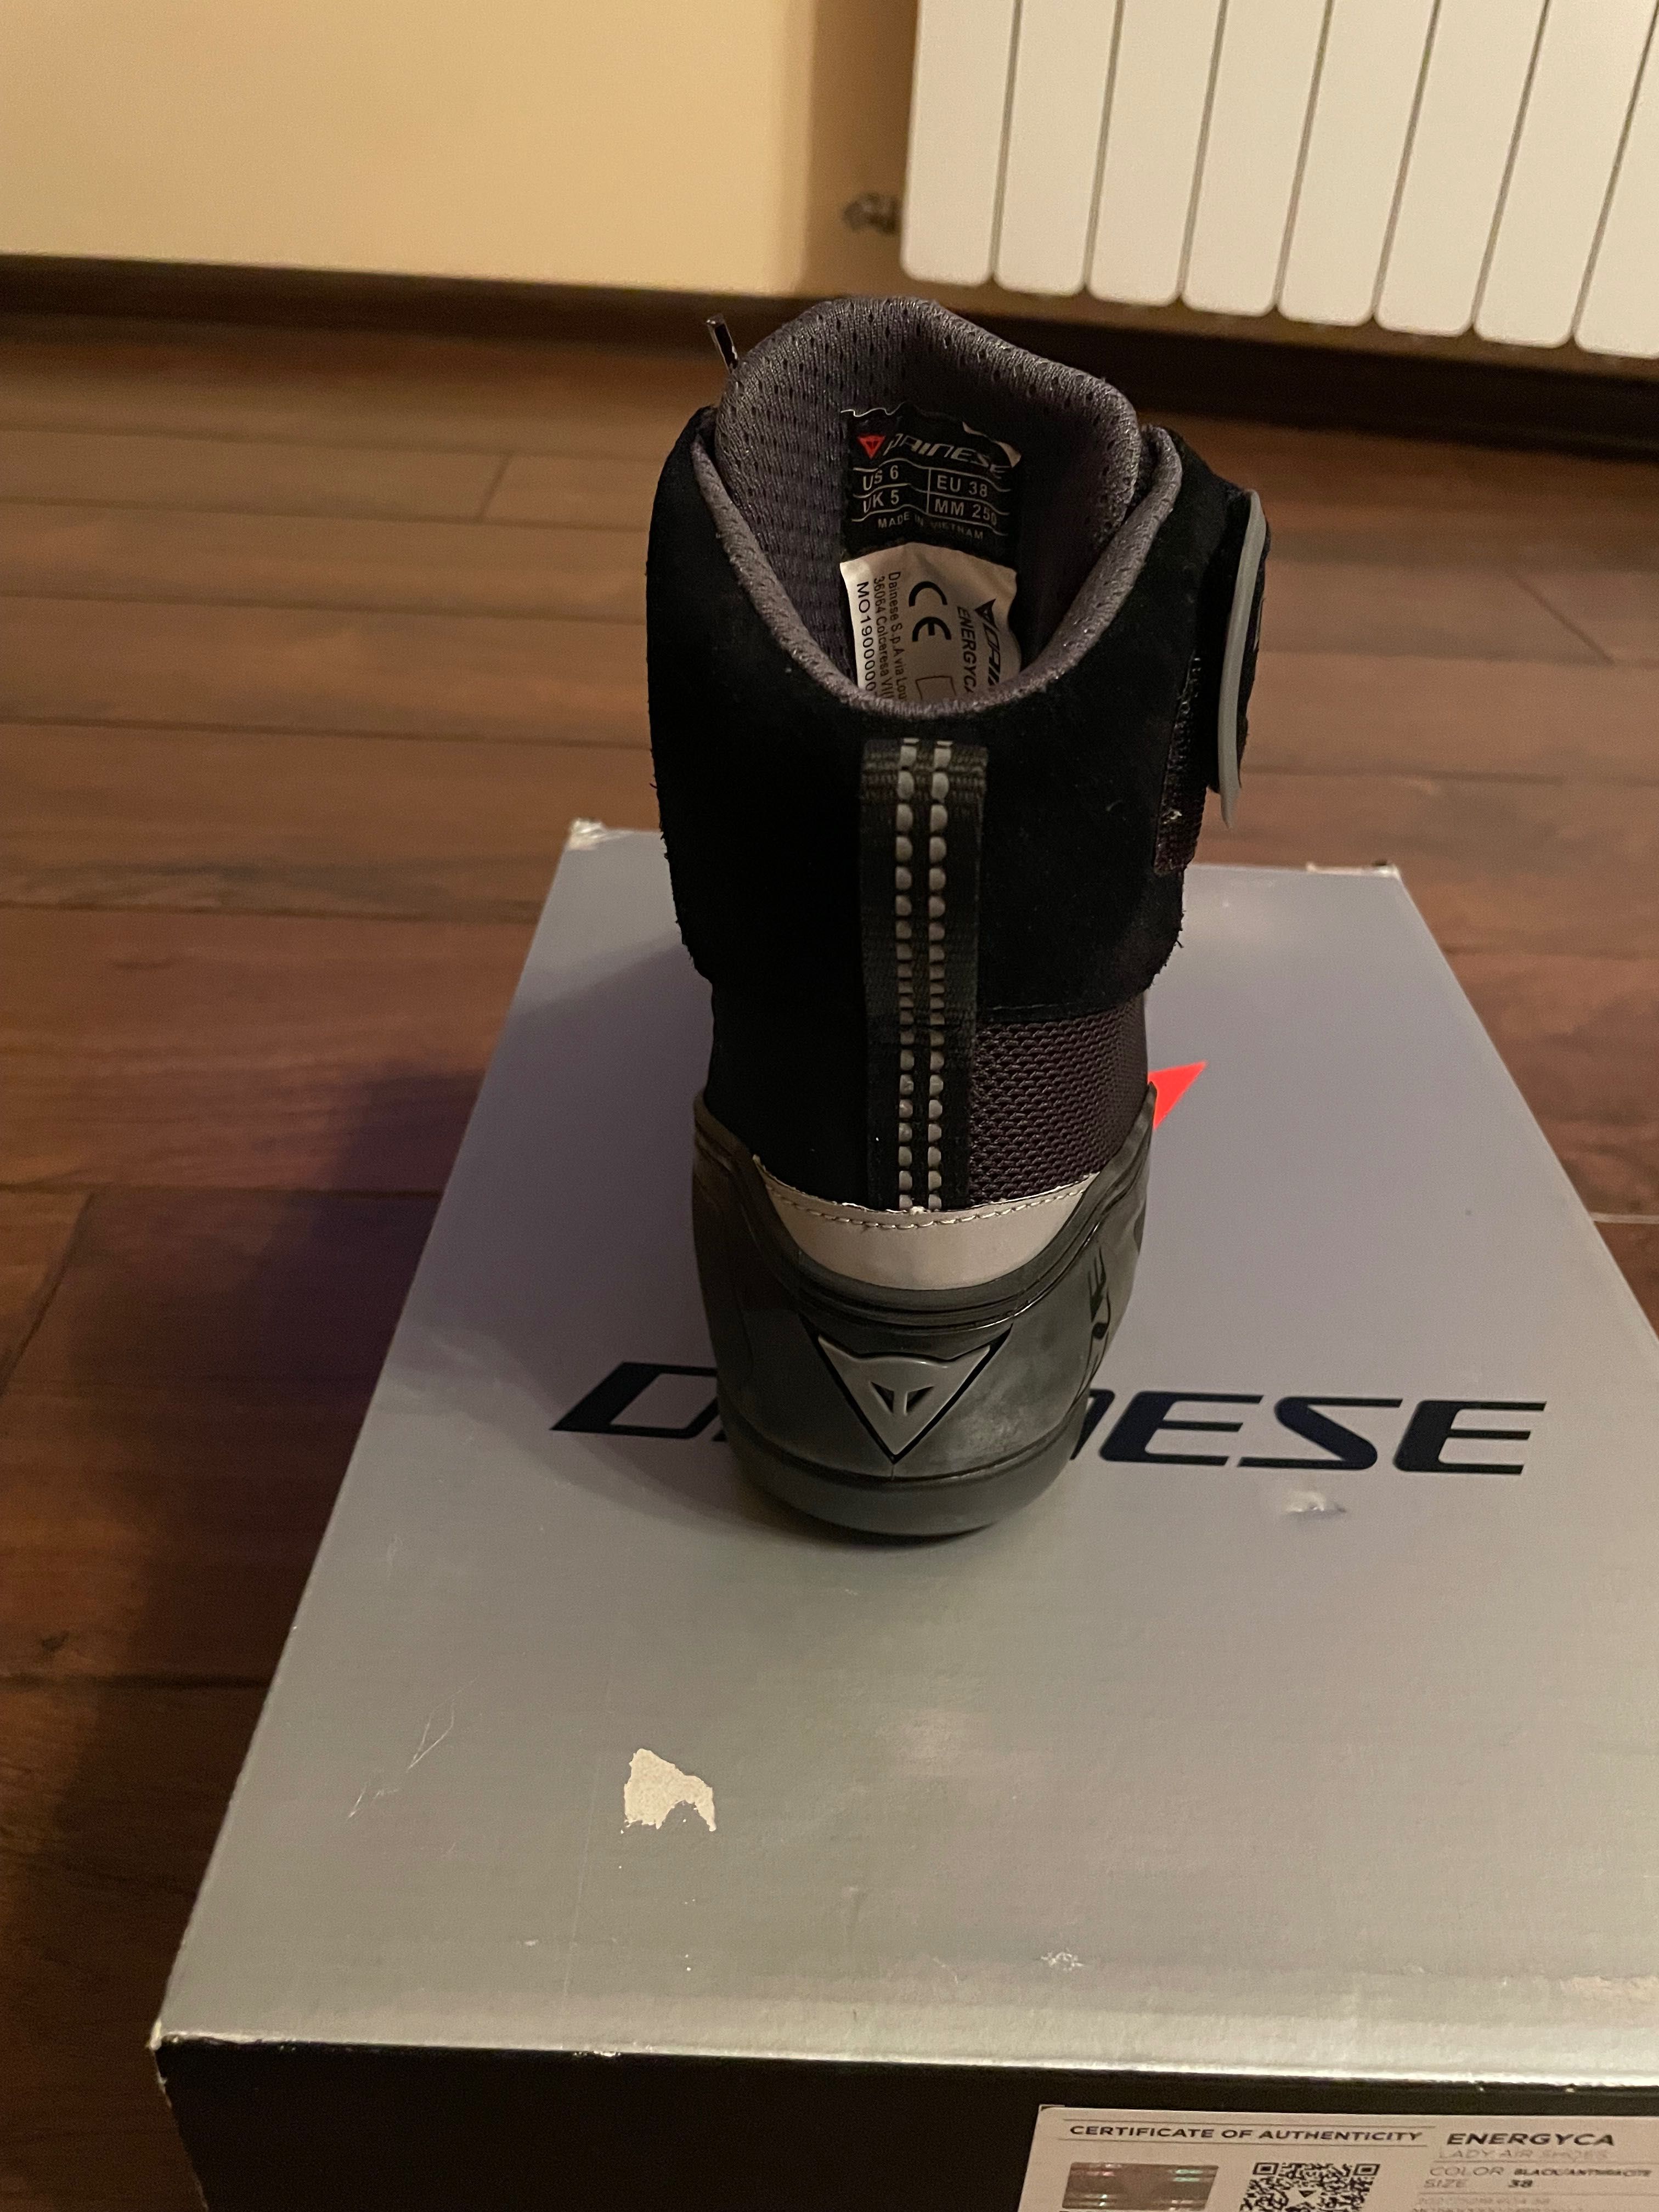 Dainese Energyca Lady Air Shoes